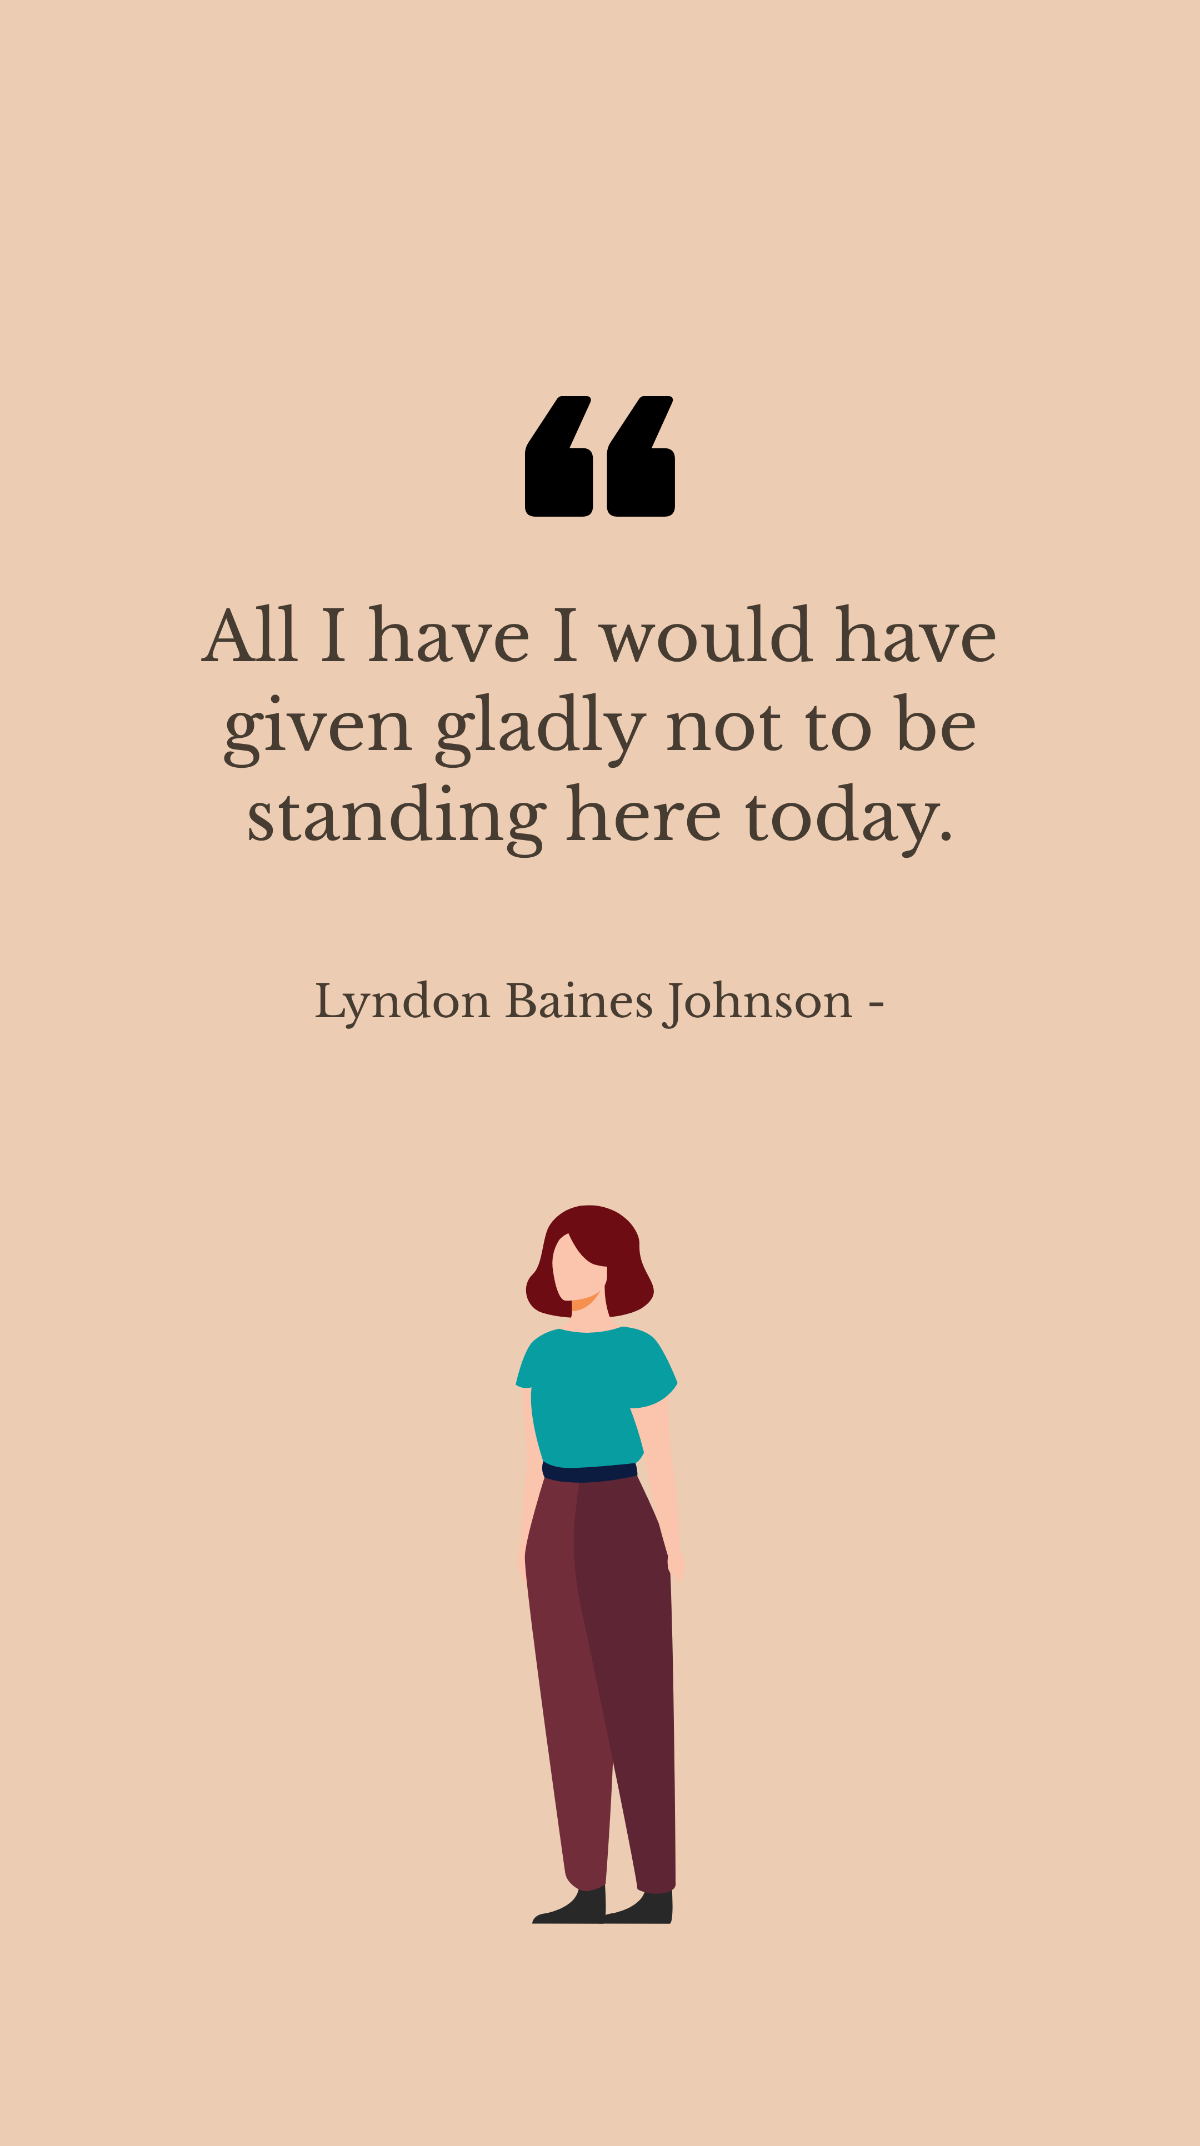 Free Lyndon Baines Johnson - All I have I would have given gladly not to be standing here today. Template